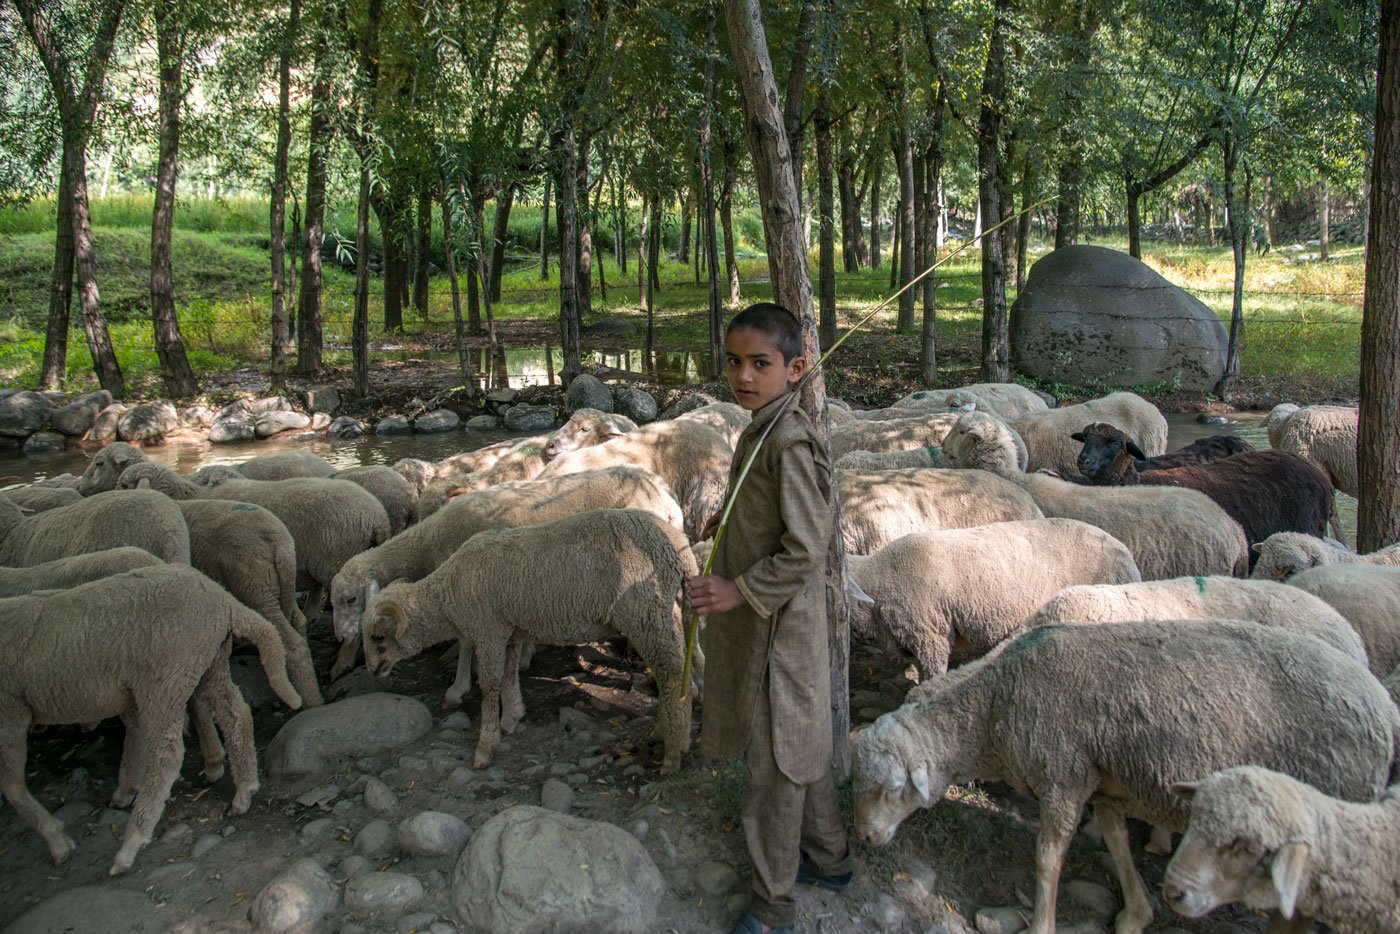 Young Rafiq belongs to a Bakarwal family and is taking his herd back to his tent